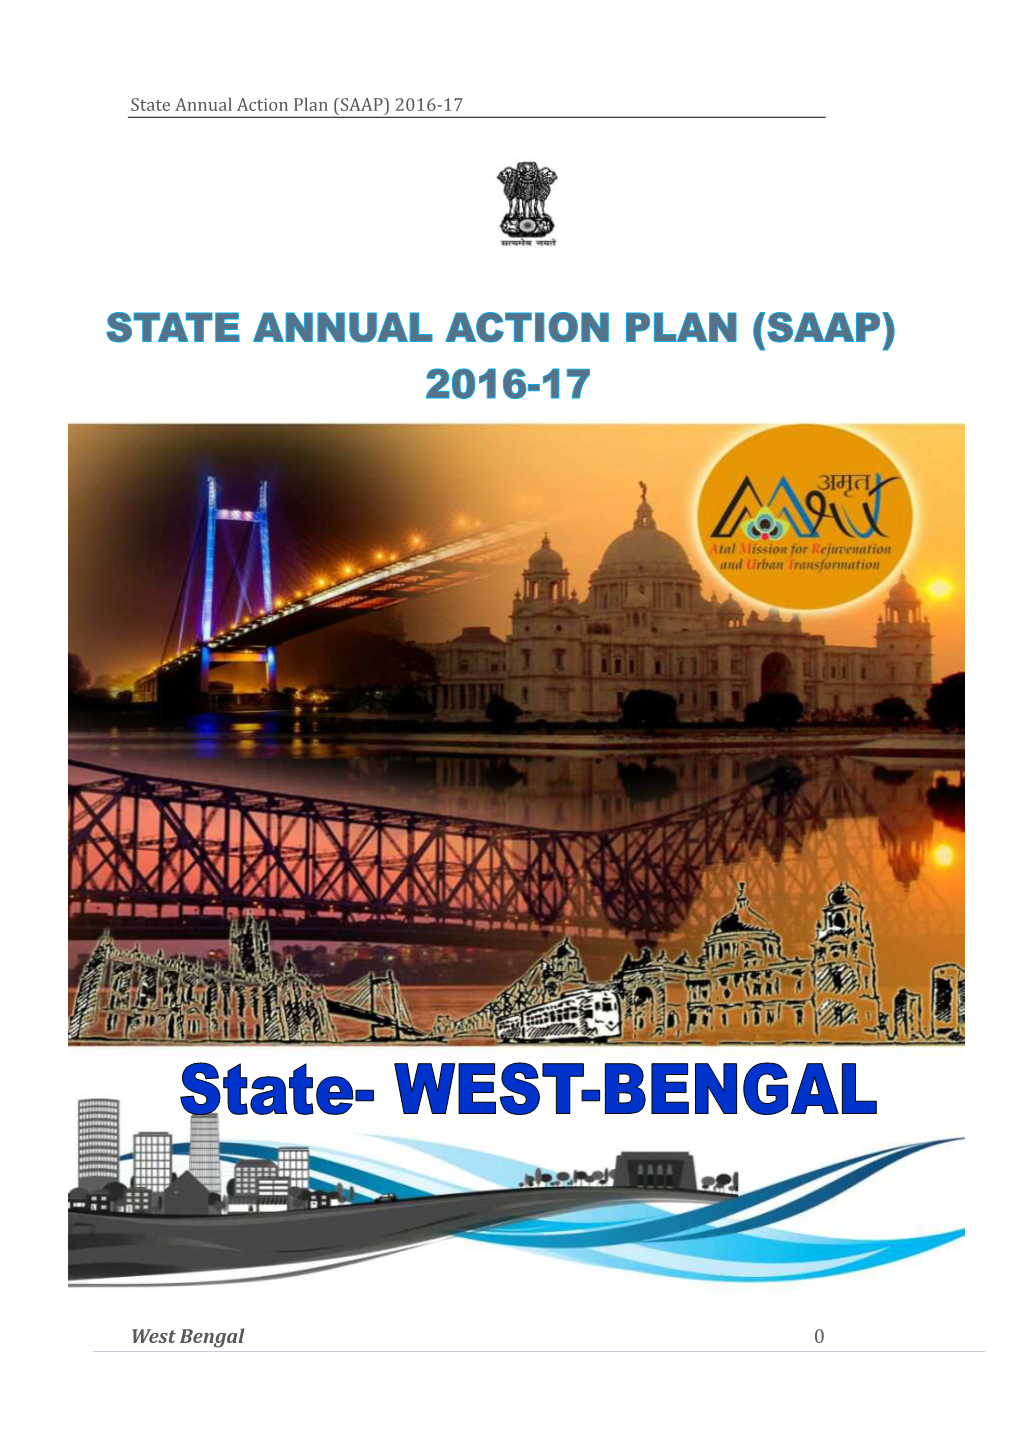 STATE ANNUAL ACTION PLAN (SAAP) for West Bengal